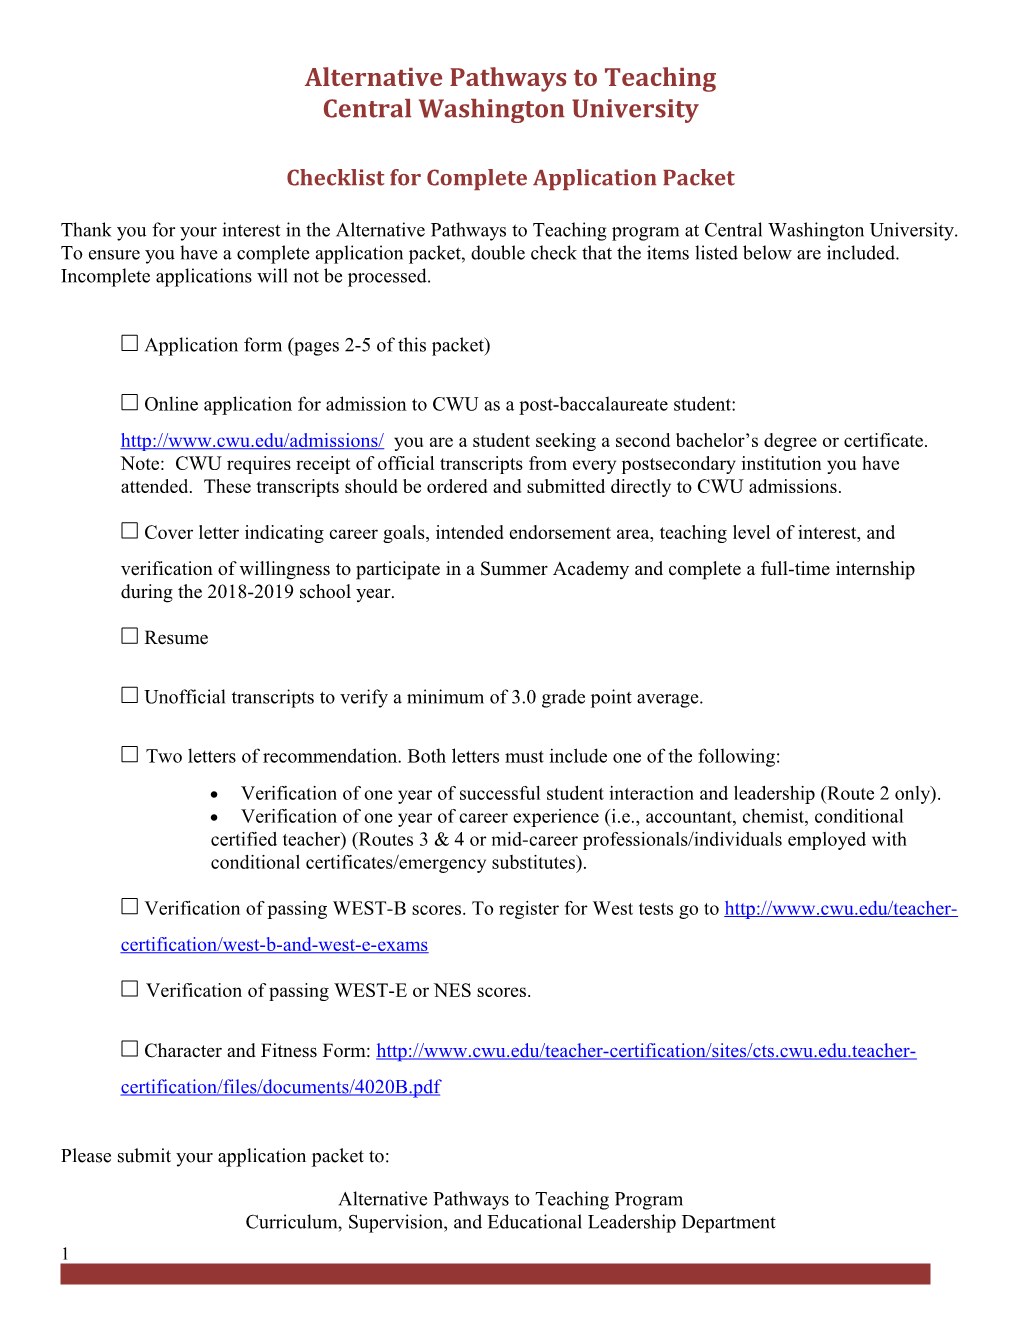 Checklist for Complete Application Packet